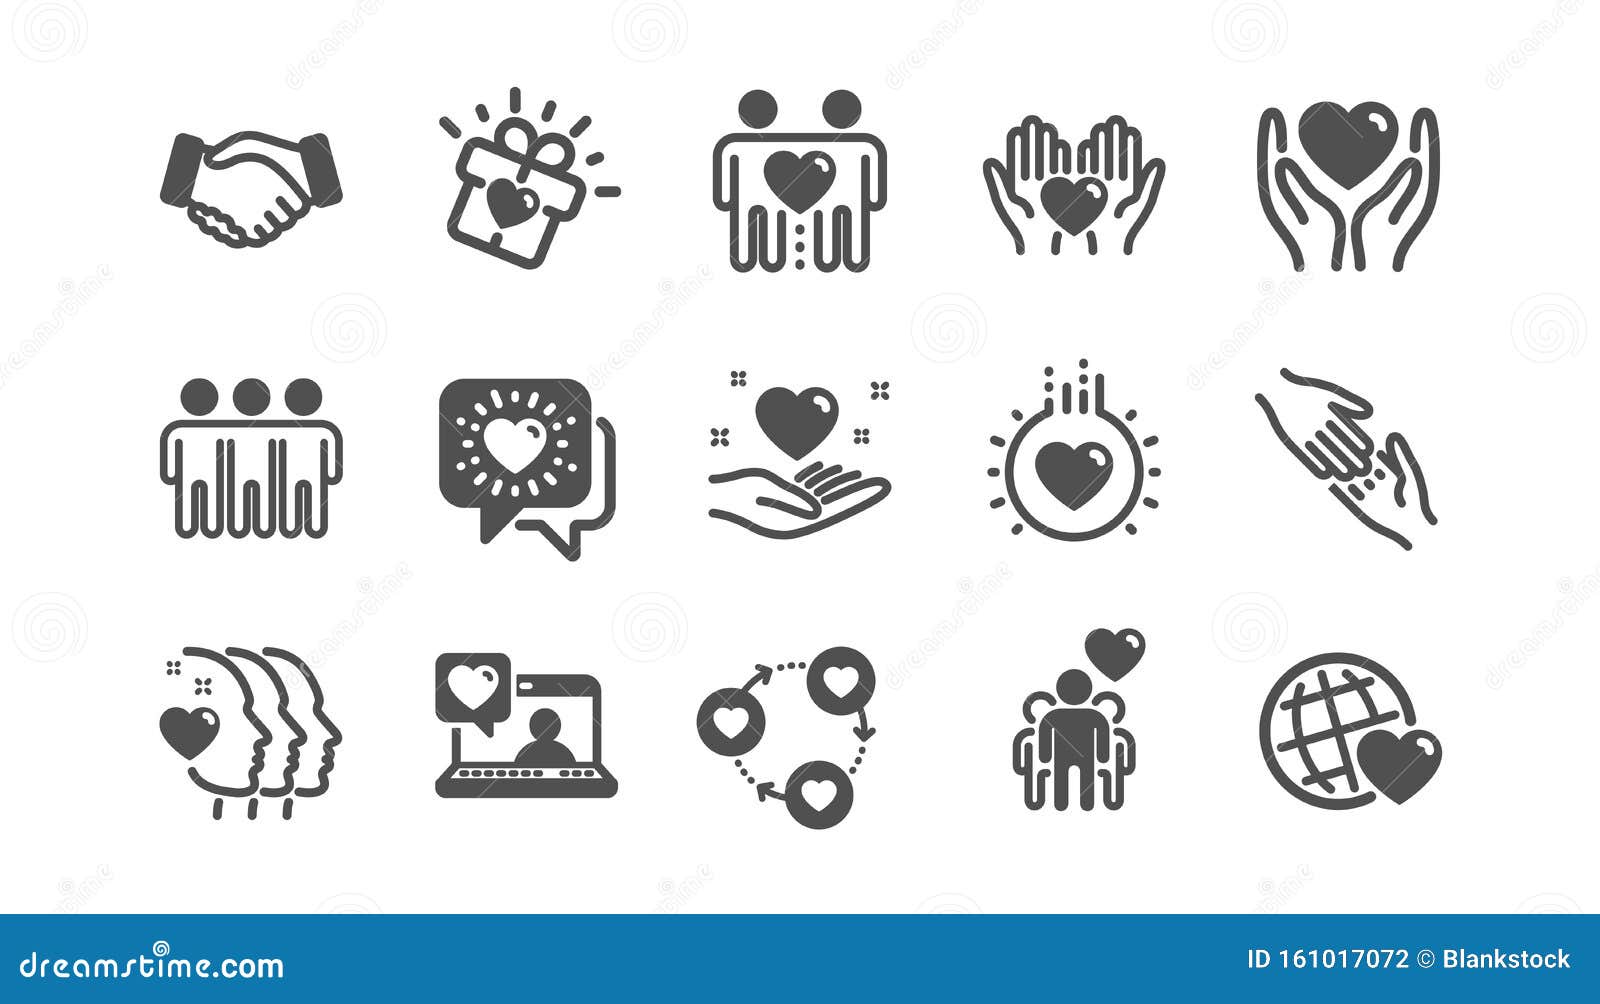 friendship and love icons. interaction, mutual understanding and assistance business. classic set. 